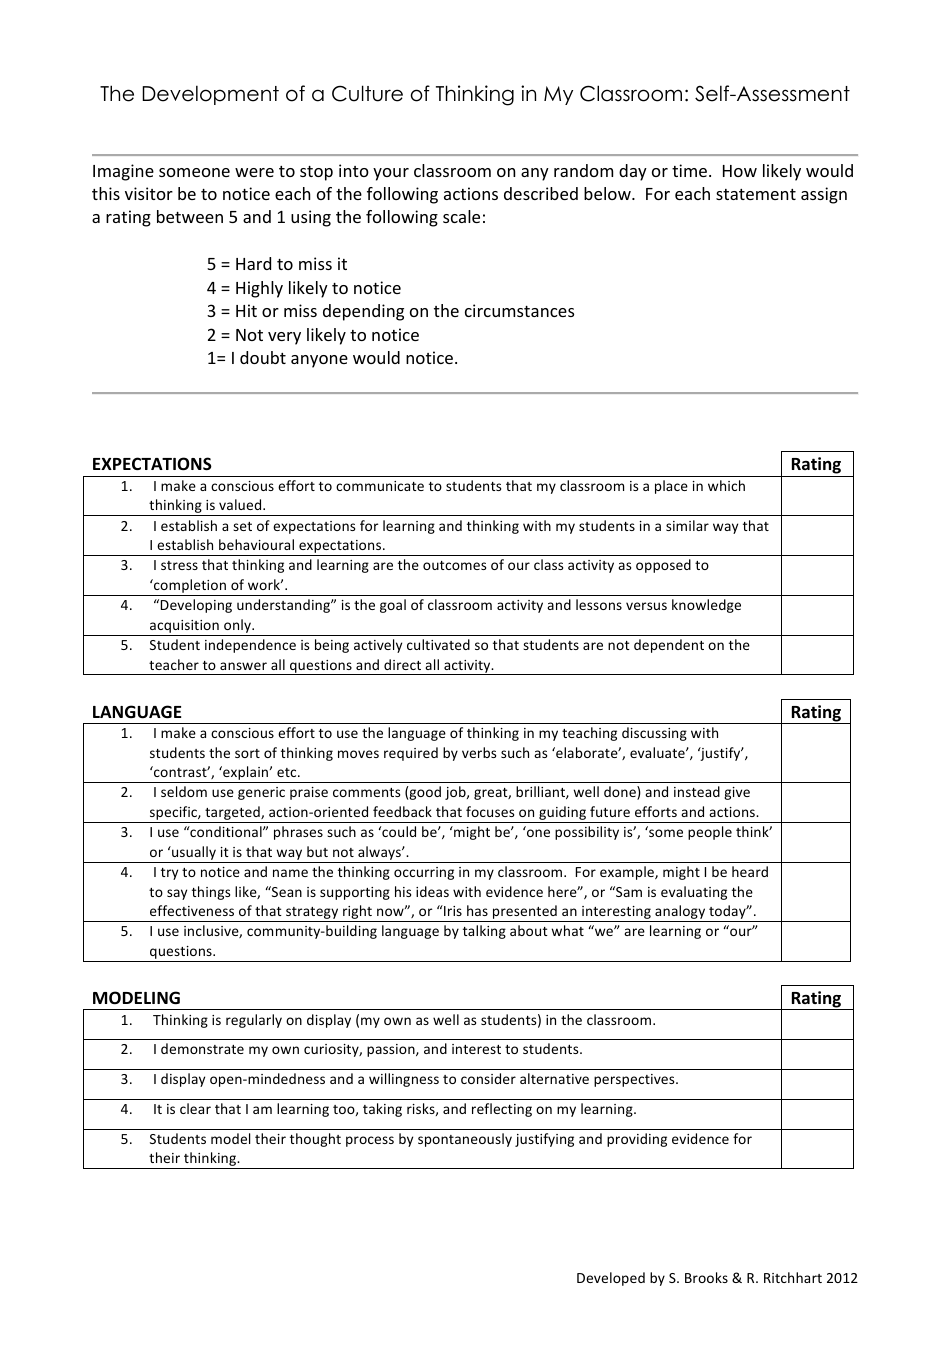 Thinking Development Self-assessment Form, Page 1